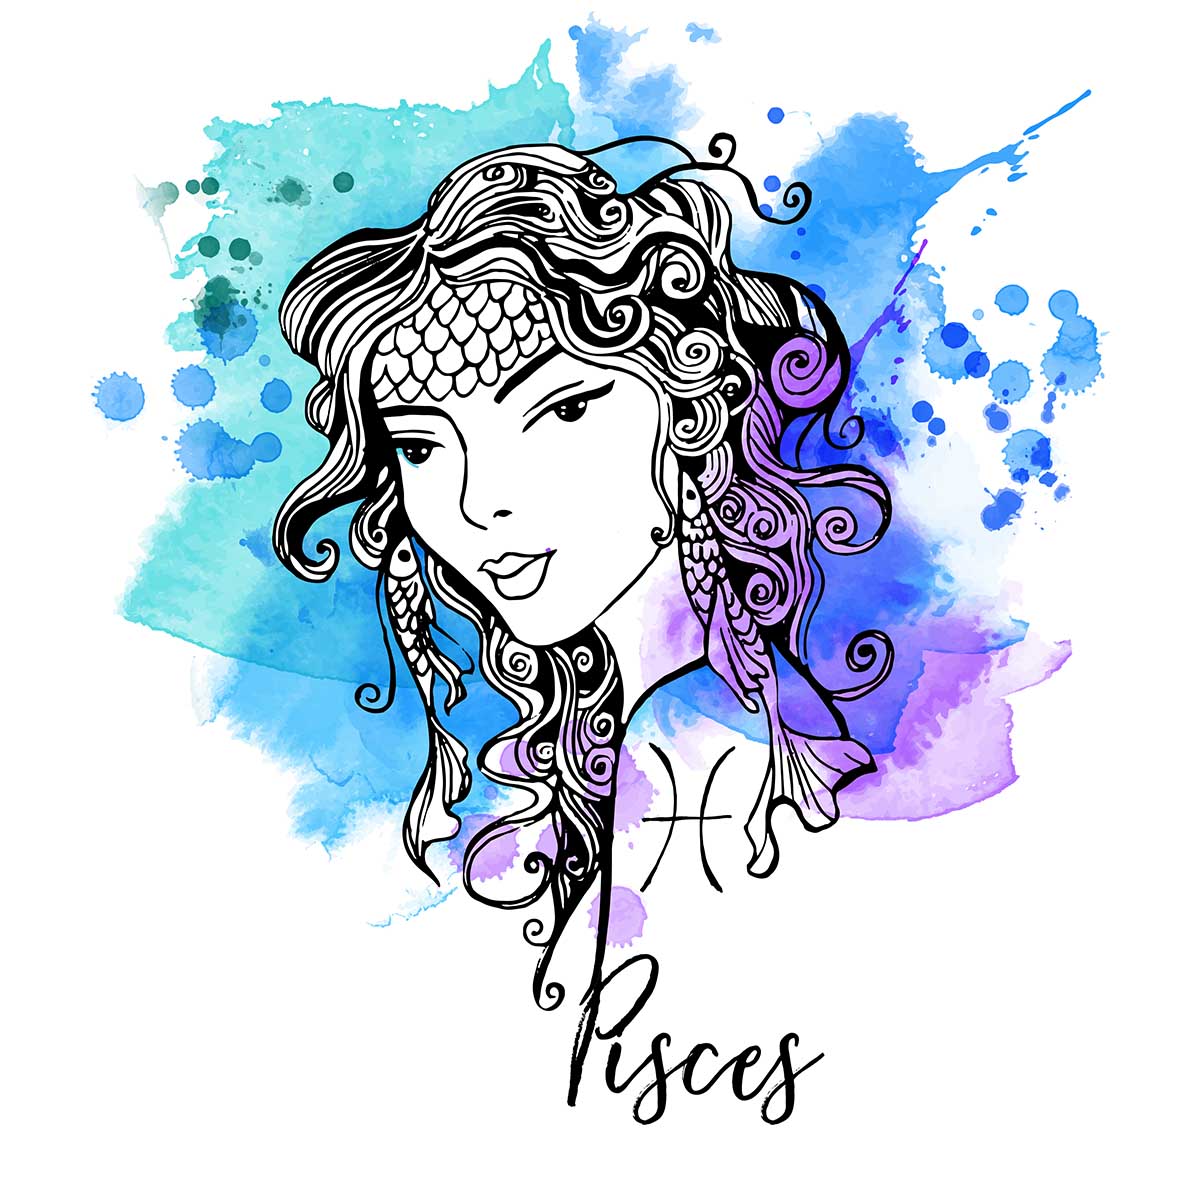 watercolor illustration of Pisces